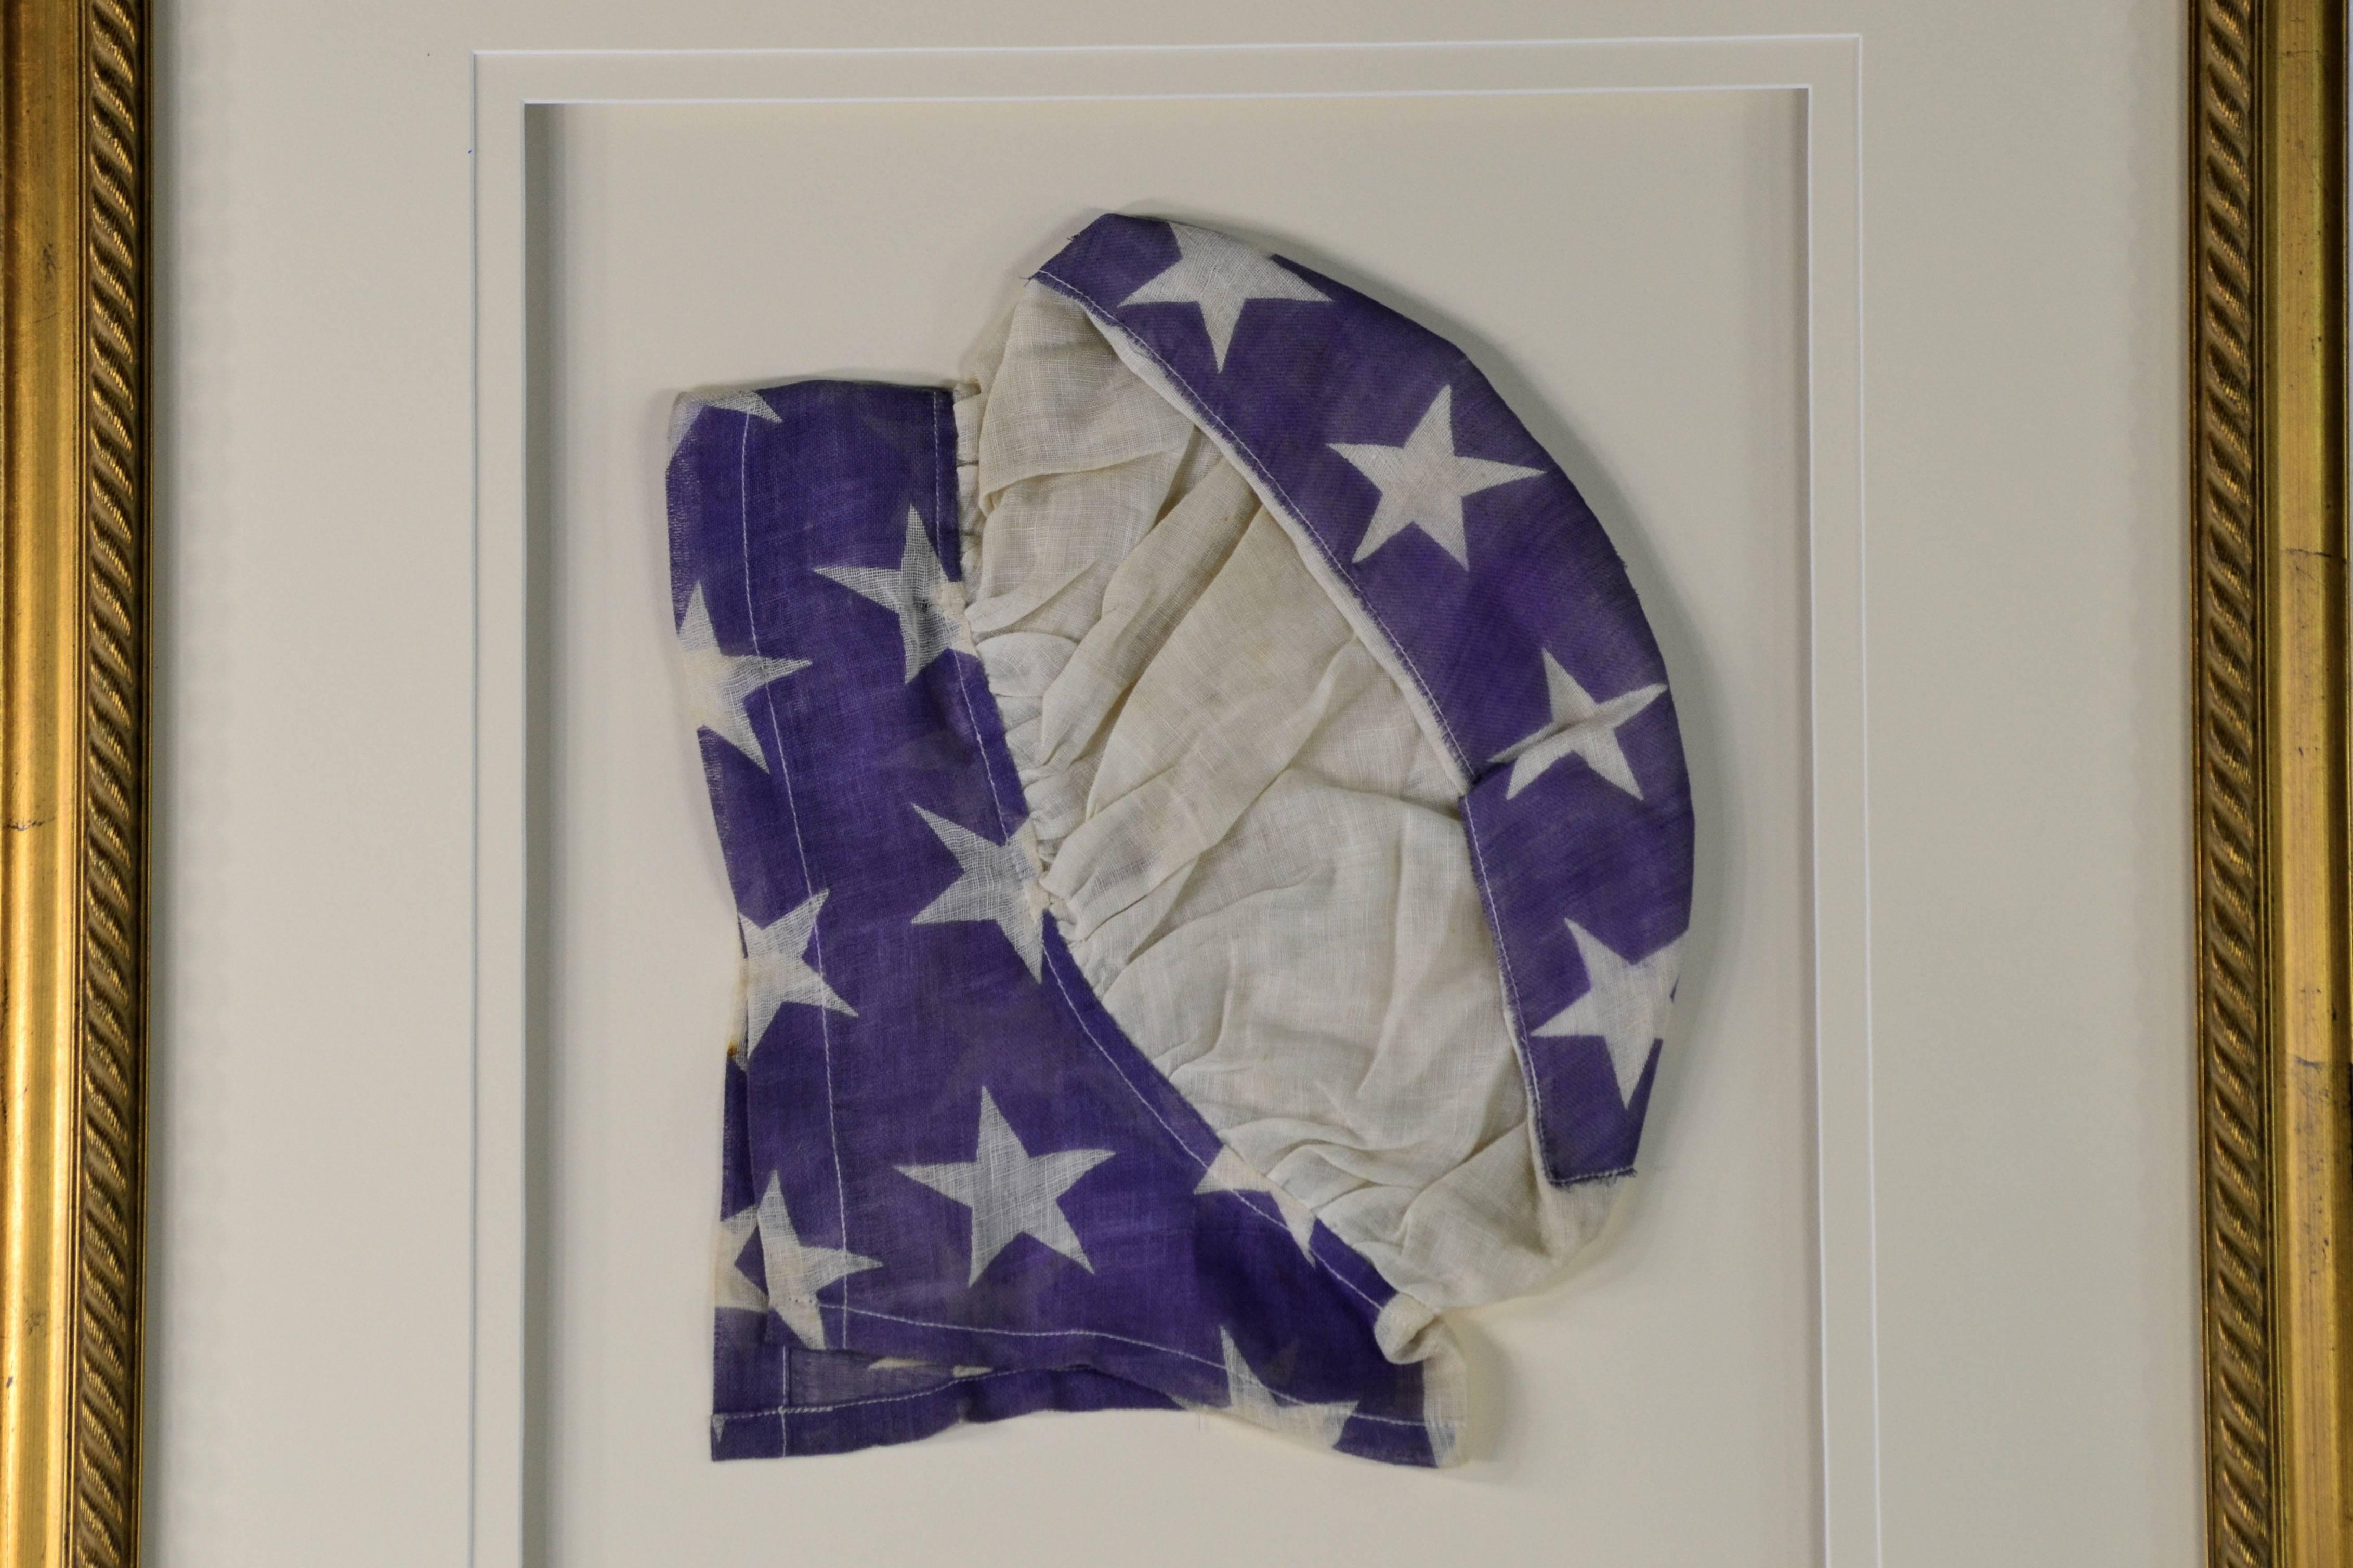 Antique Woman's Parade Hat / Bonnet. Hats like this were used by women marching in protest and parades to gain the right to vote. It was called the Suffragette movement.

Conservation framing with UV acrylic.

 